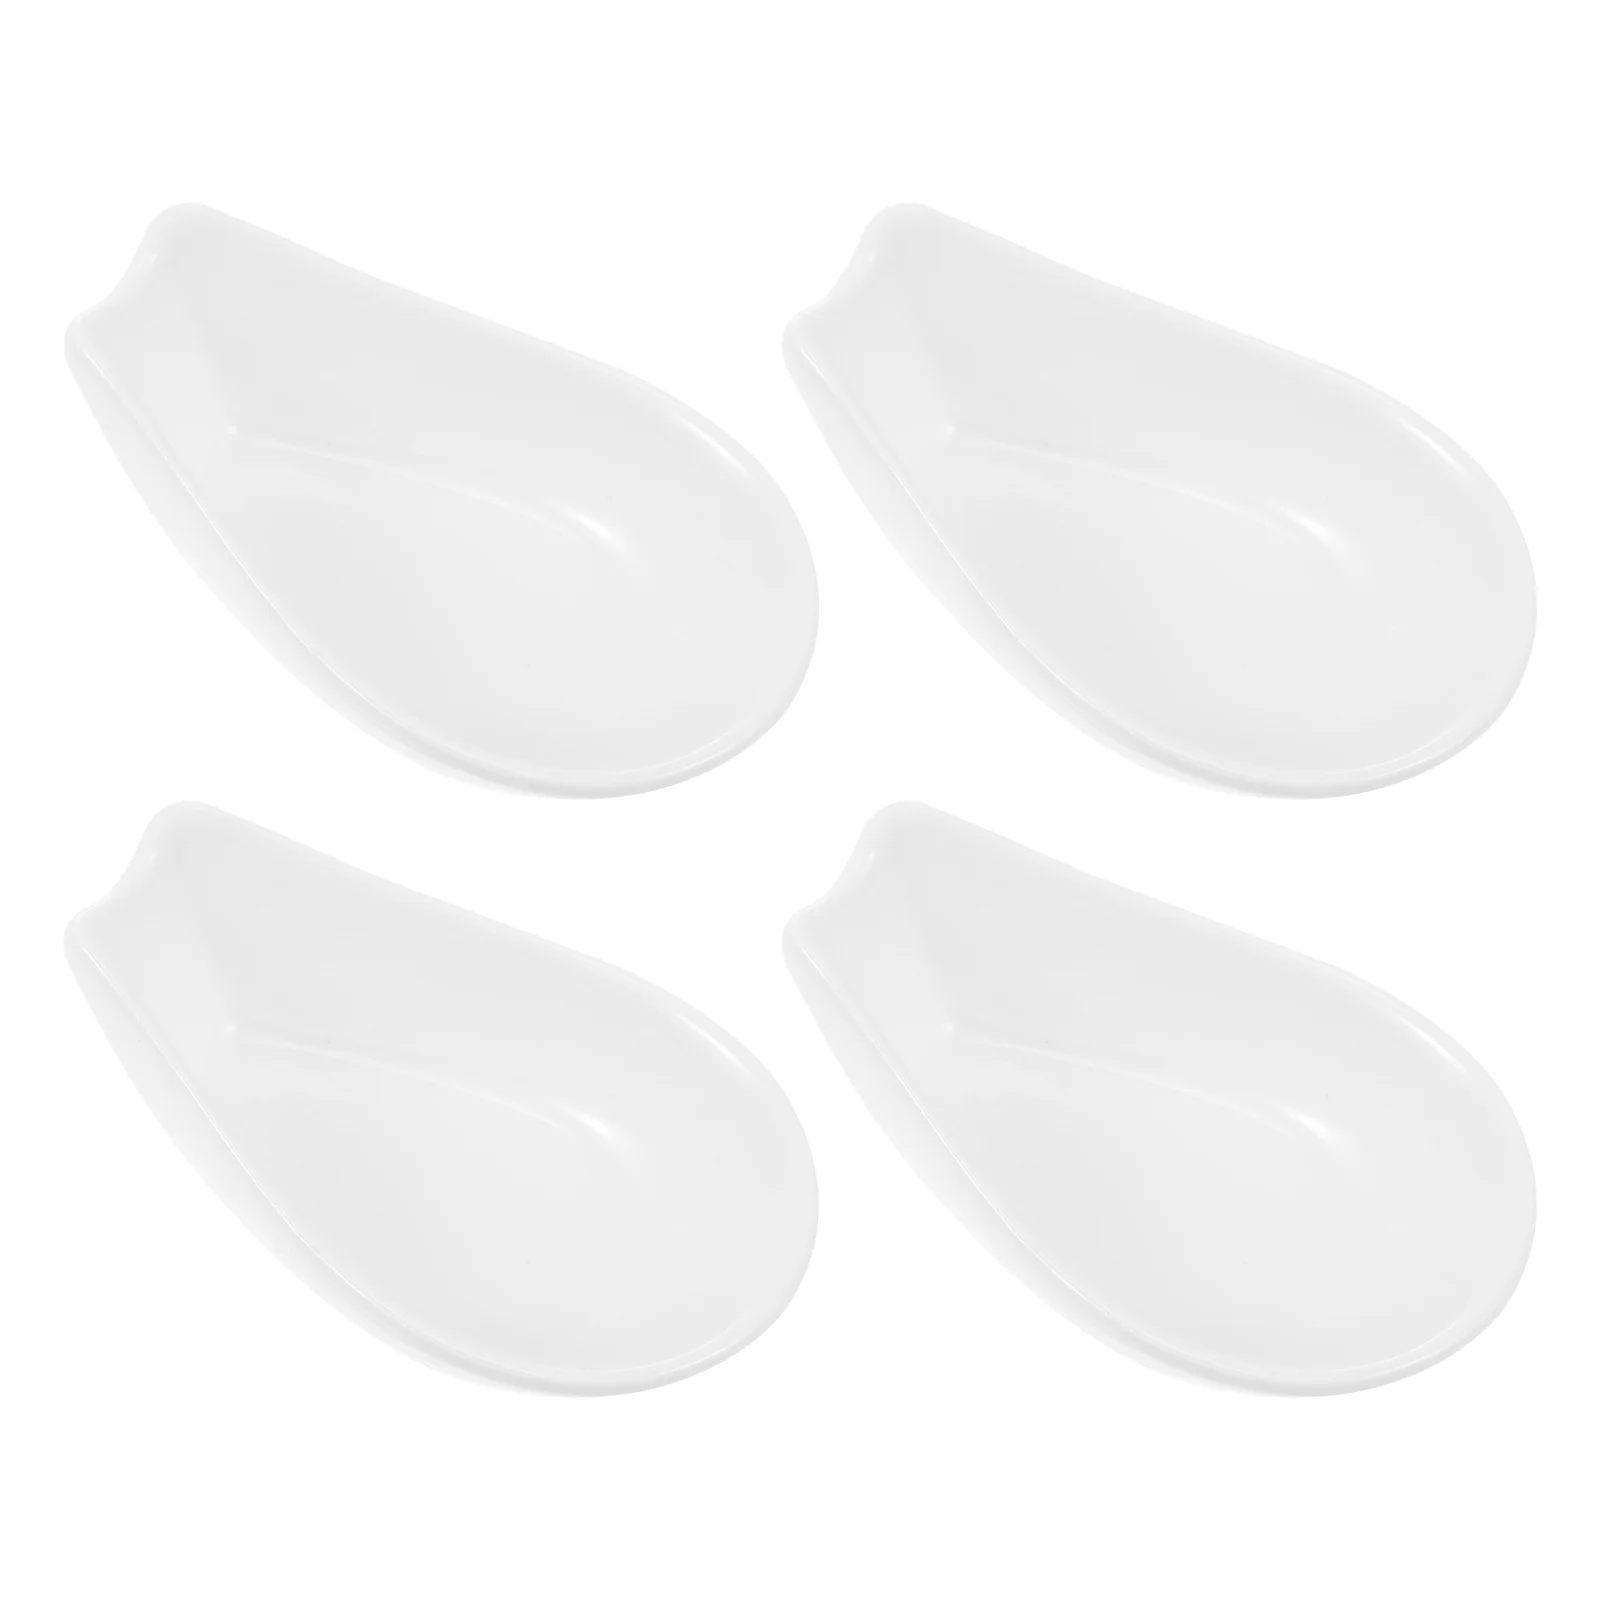 

4pcs Racks Ceramic Spoon Rests Oil-proof Scoops Holders Convenient Soup Spoon Stands for Restaurant Gift Home